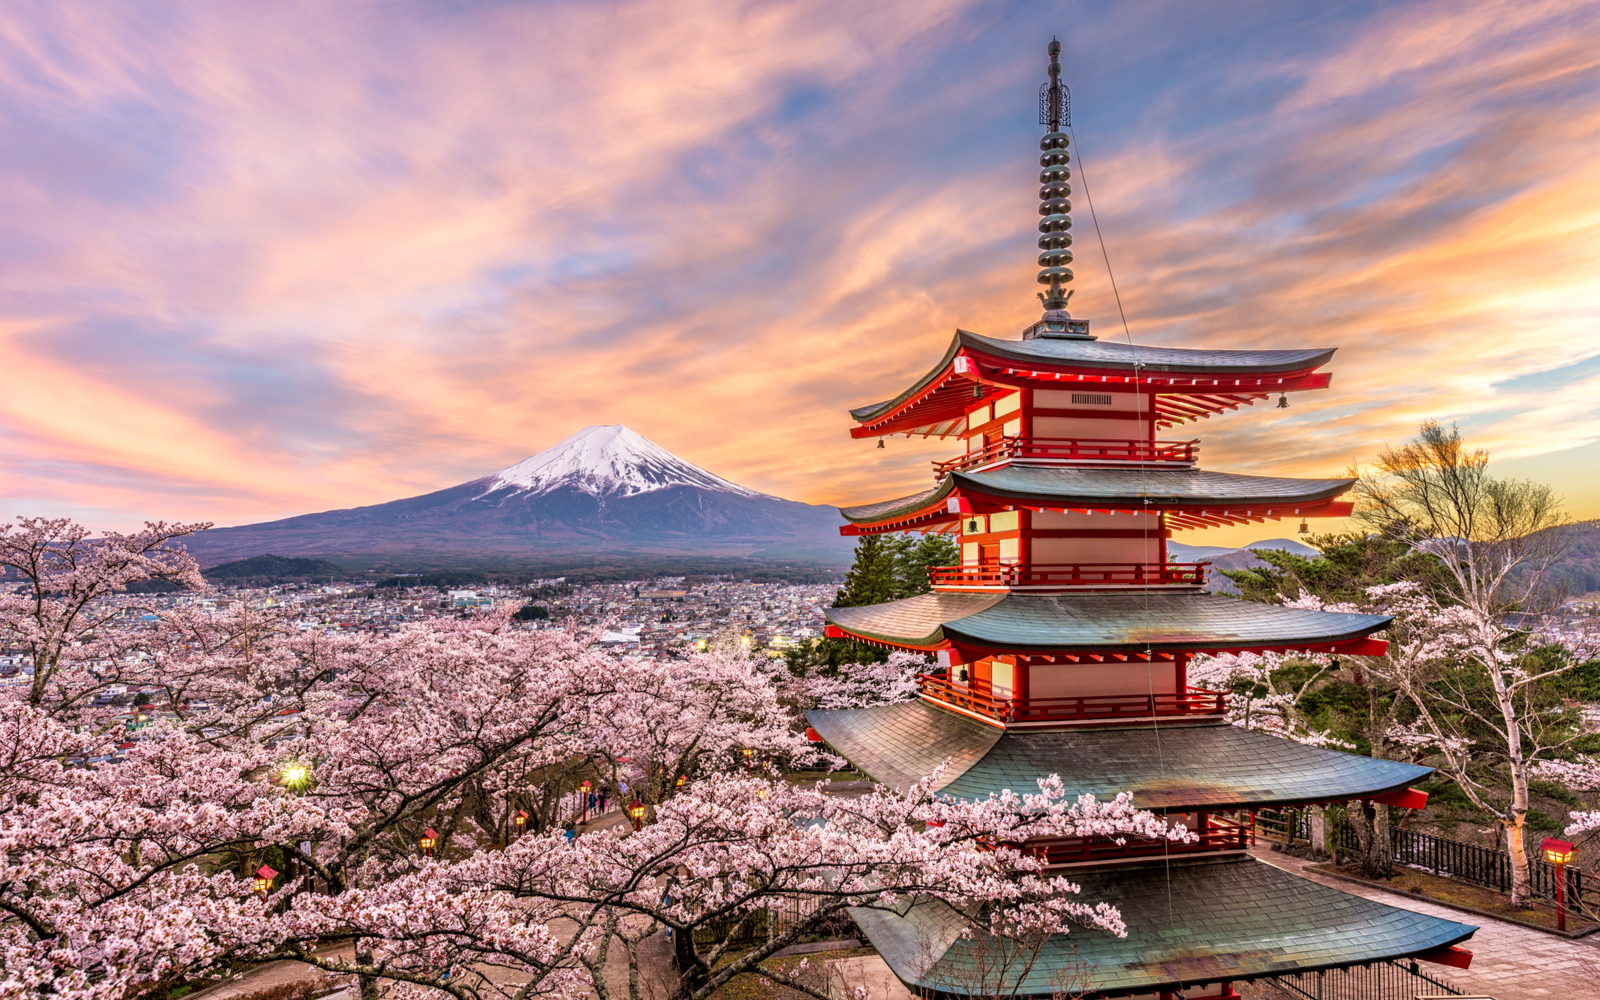 Japan at Chureito Pagoda with Mount Fuji in the background for a piece on the best places to visit in Japan